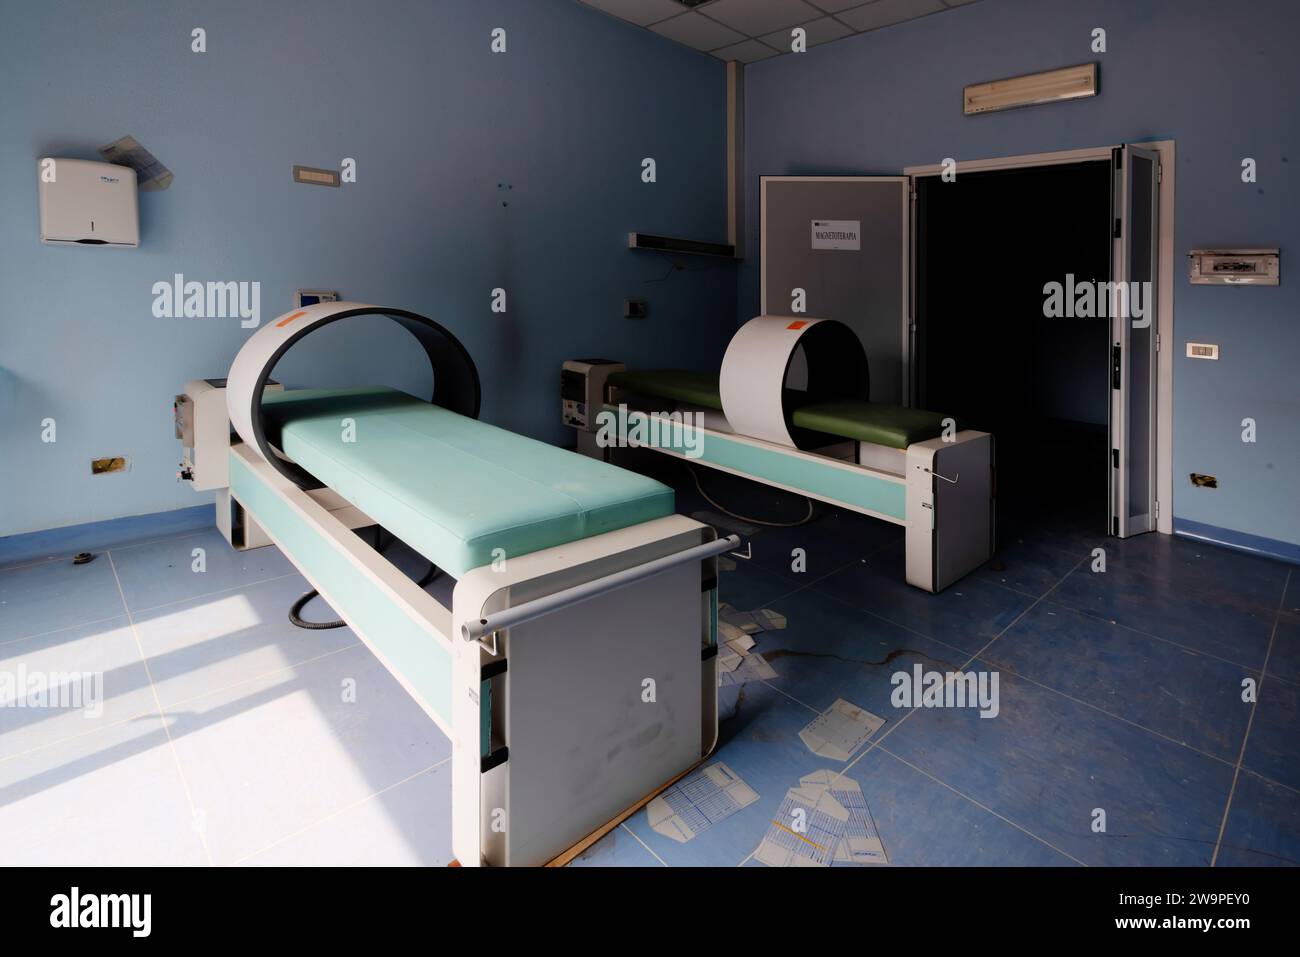 December 10, 2023, Room of an abandoned hospital, with beds and medical equipment. URBEX Stock Photo